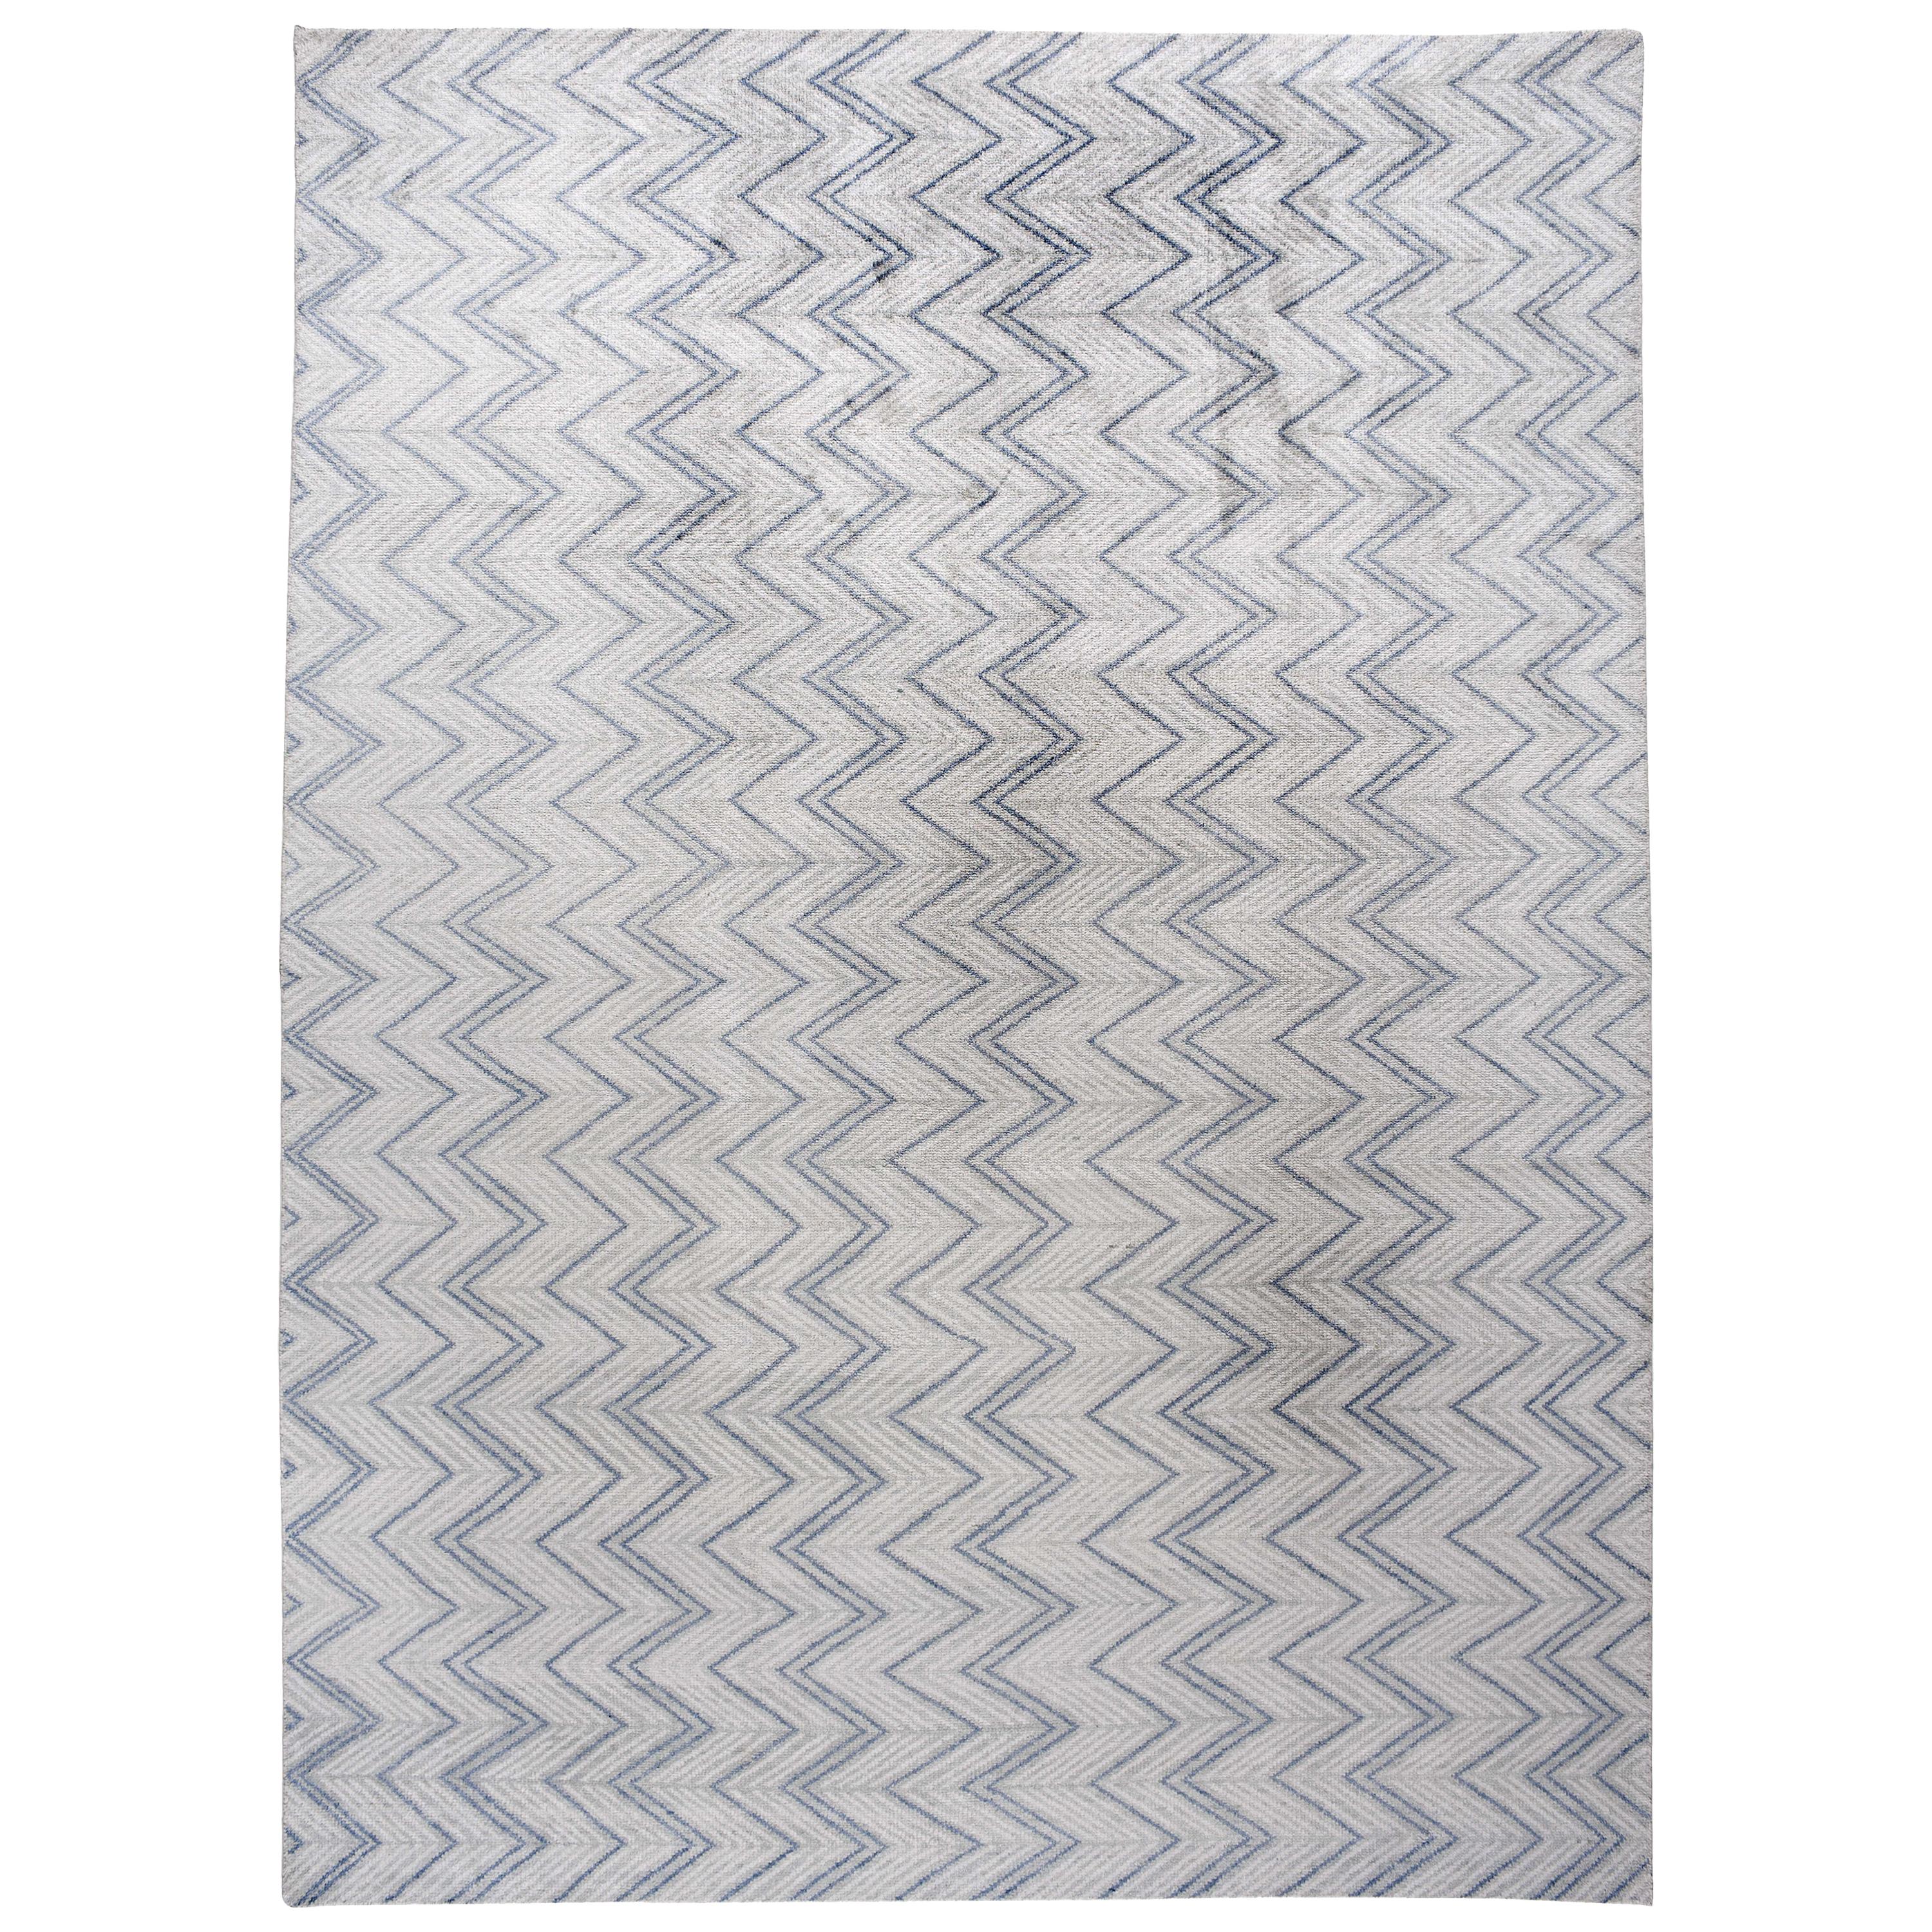 Indian Zig Zag Rug For Sale at 1stDibs | grey and white zig zag rug